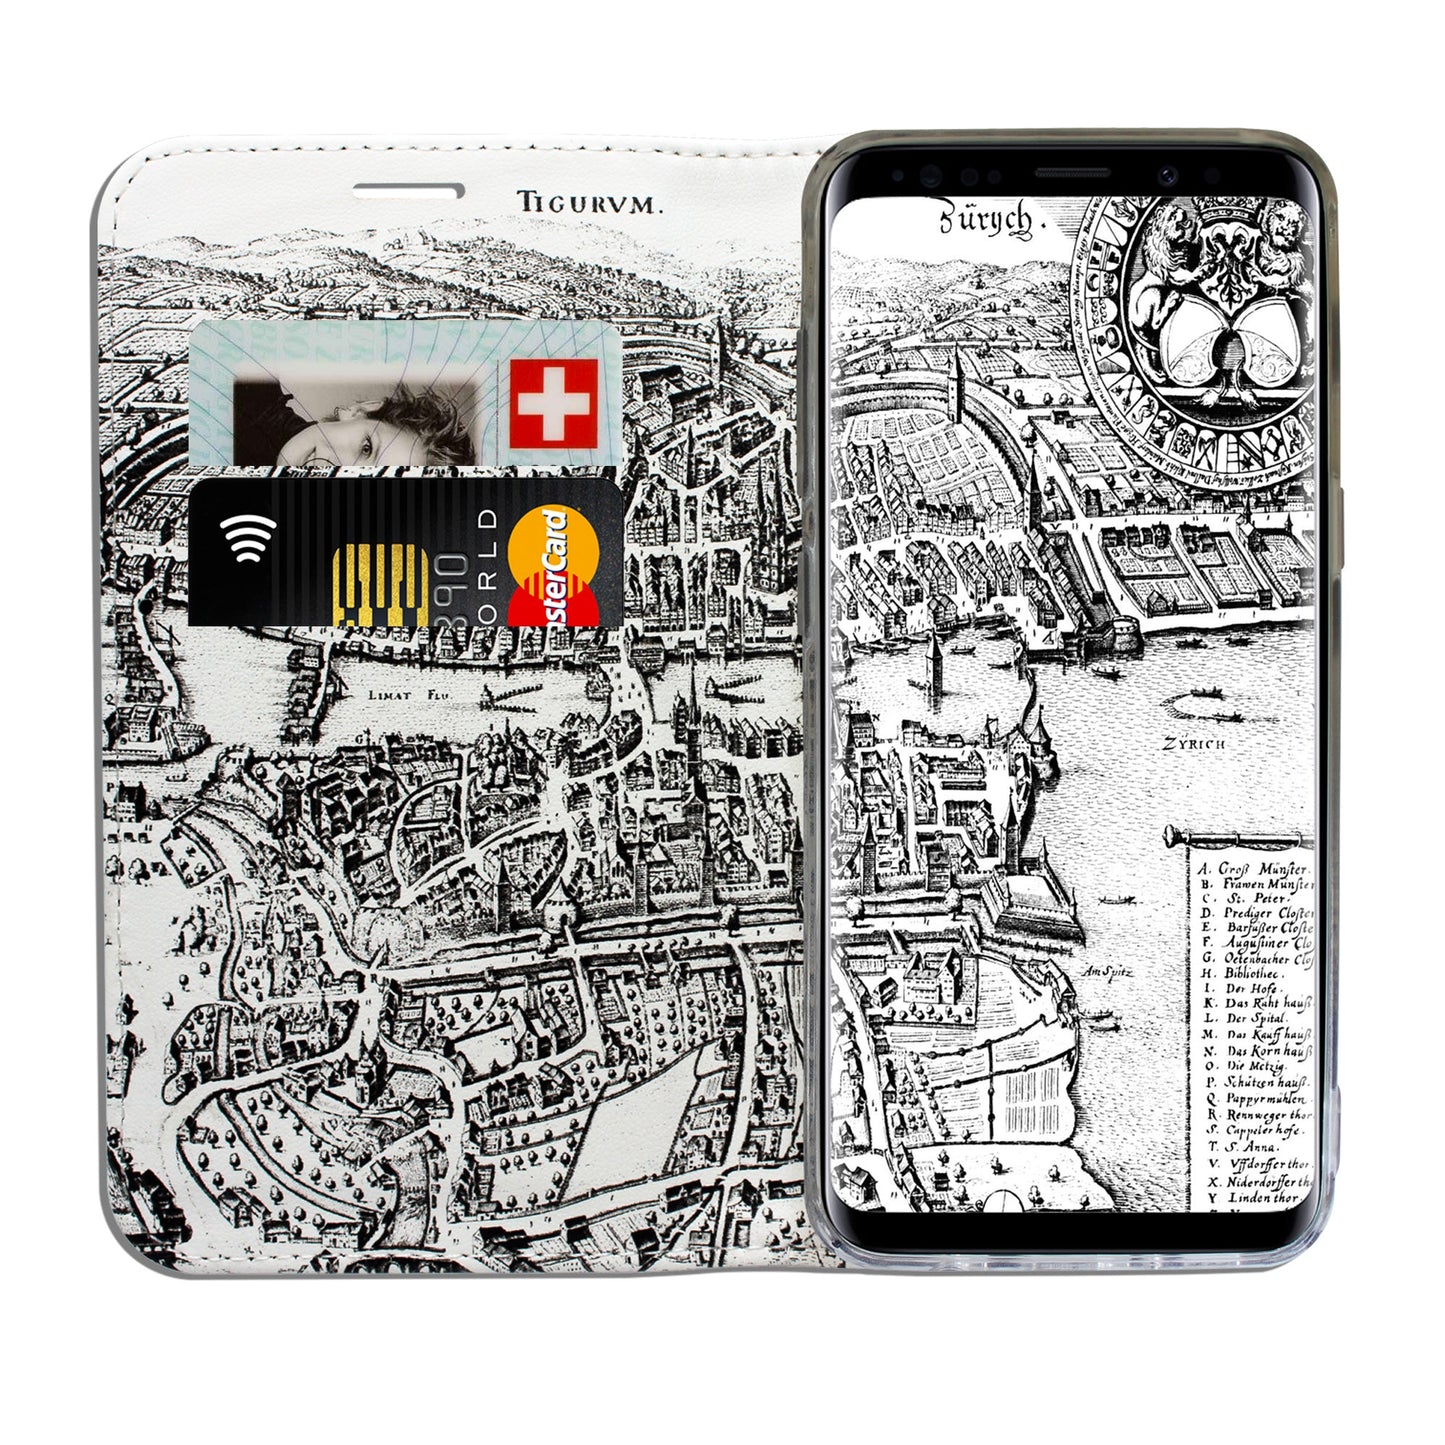 Coque Panorama City from Above pour Samsung Galaxy S8